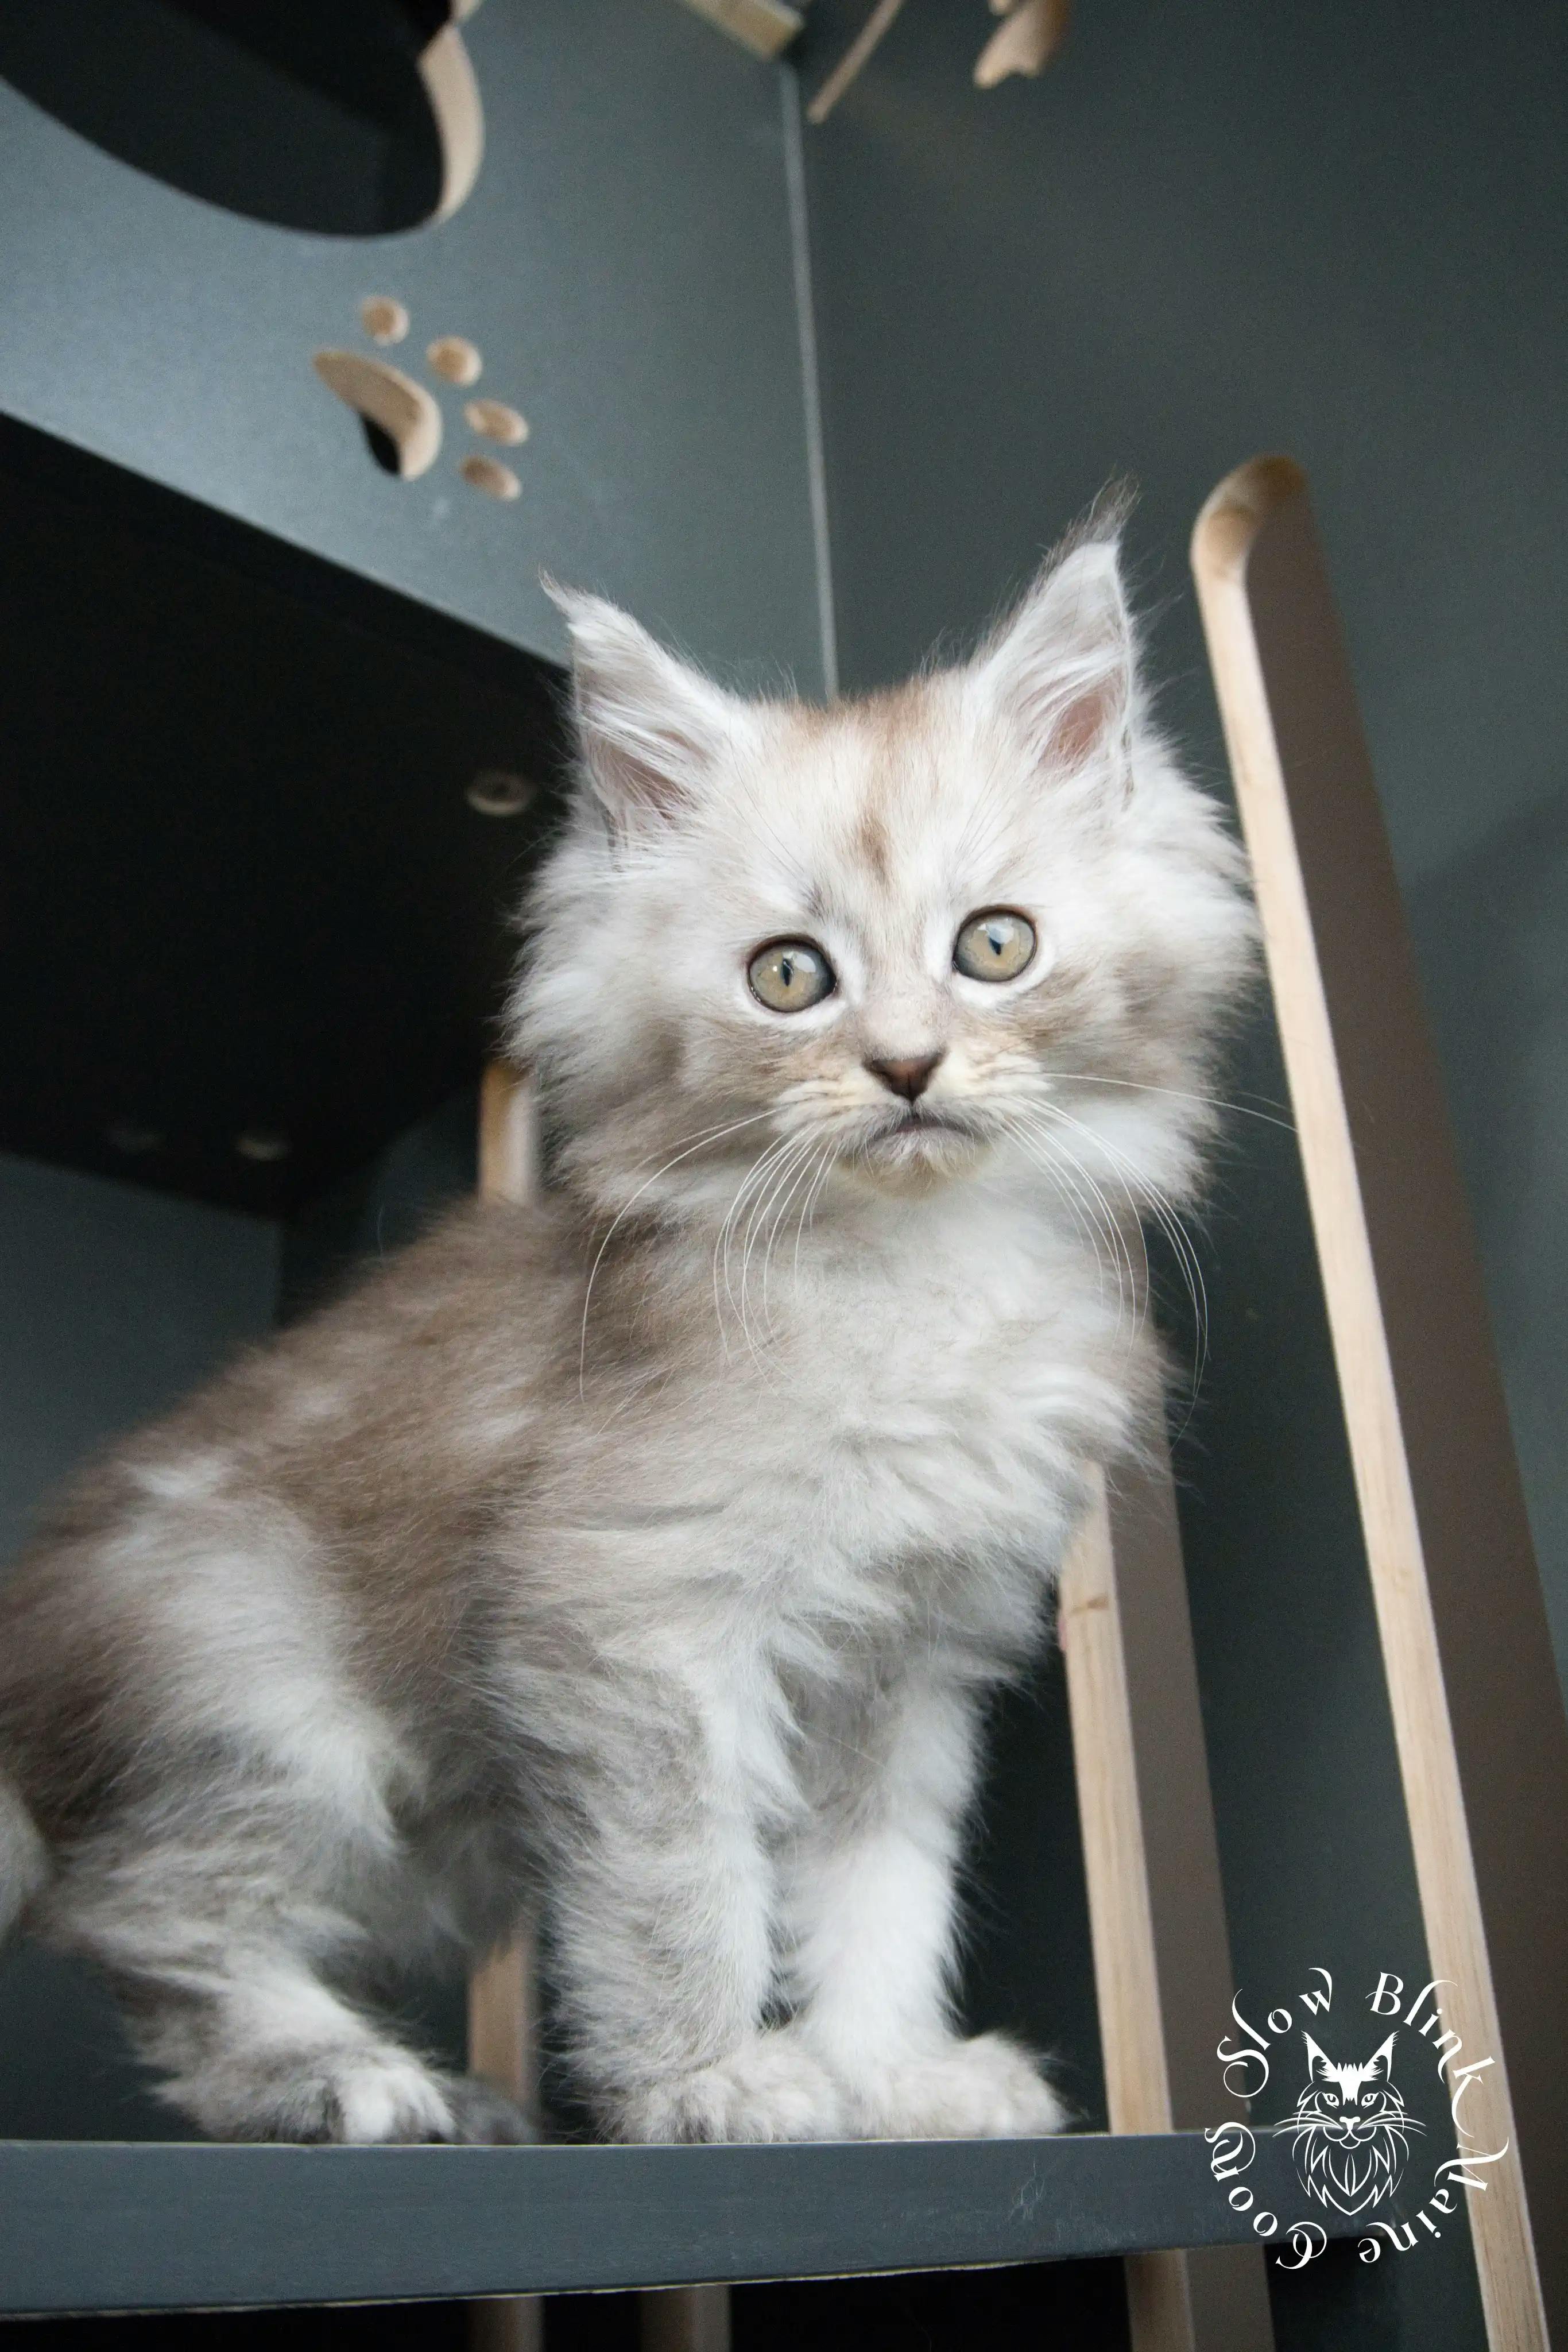 High Silver Maine Coon Kittens > black silver tabby maine coon kitten | ems code ns 22 23 24 25 | slowblinkmainecoons | 394